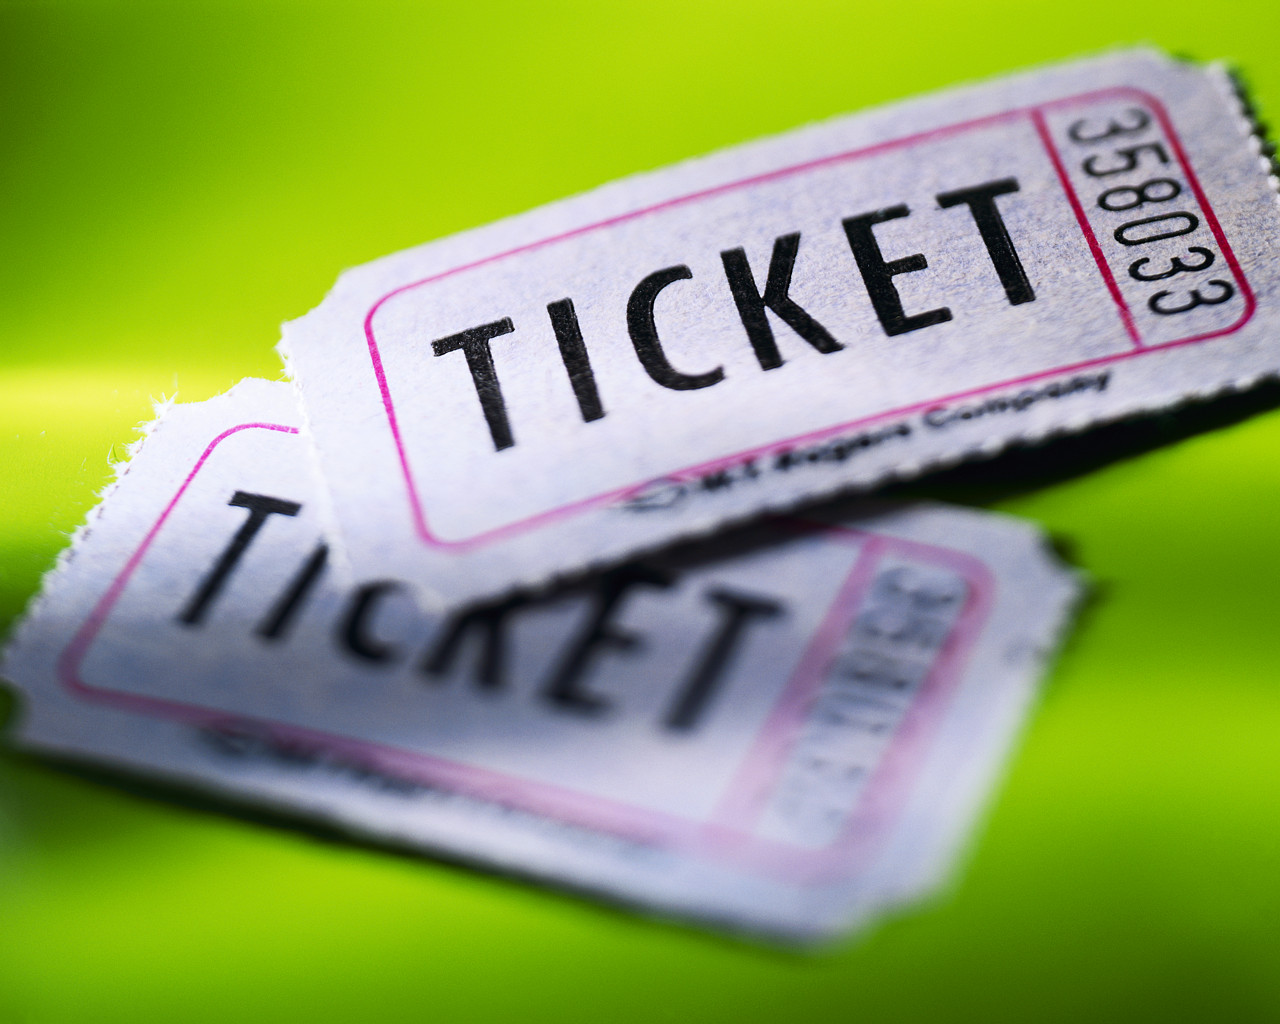 Why Purchase Tickets Online Rather Than From A Counter